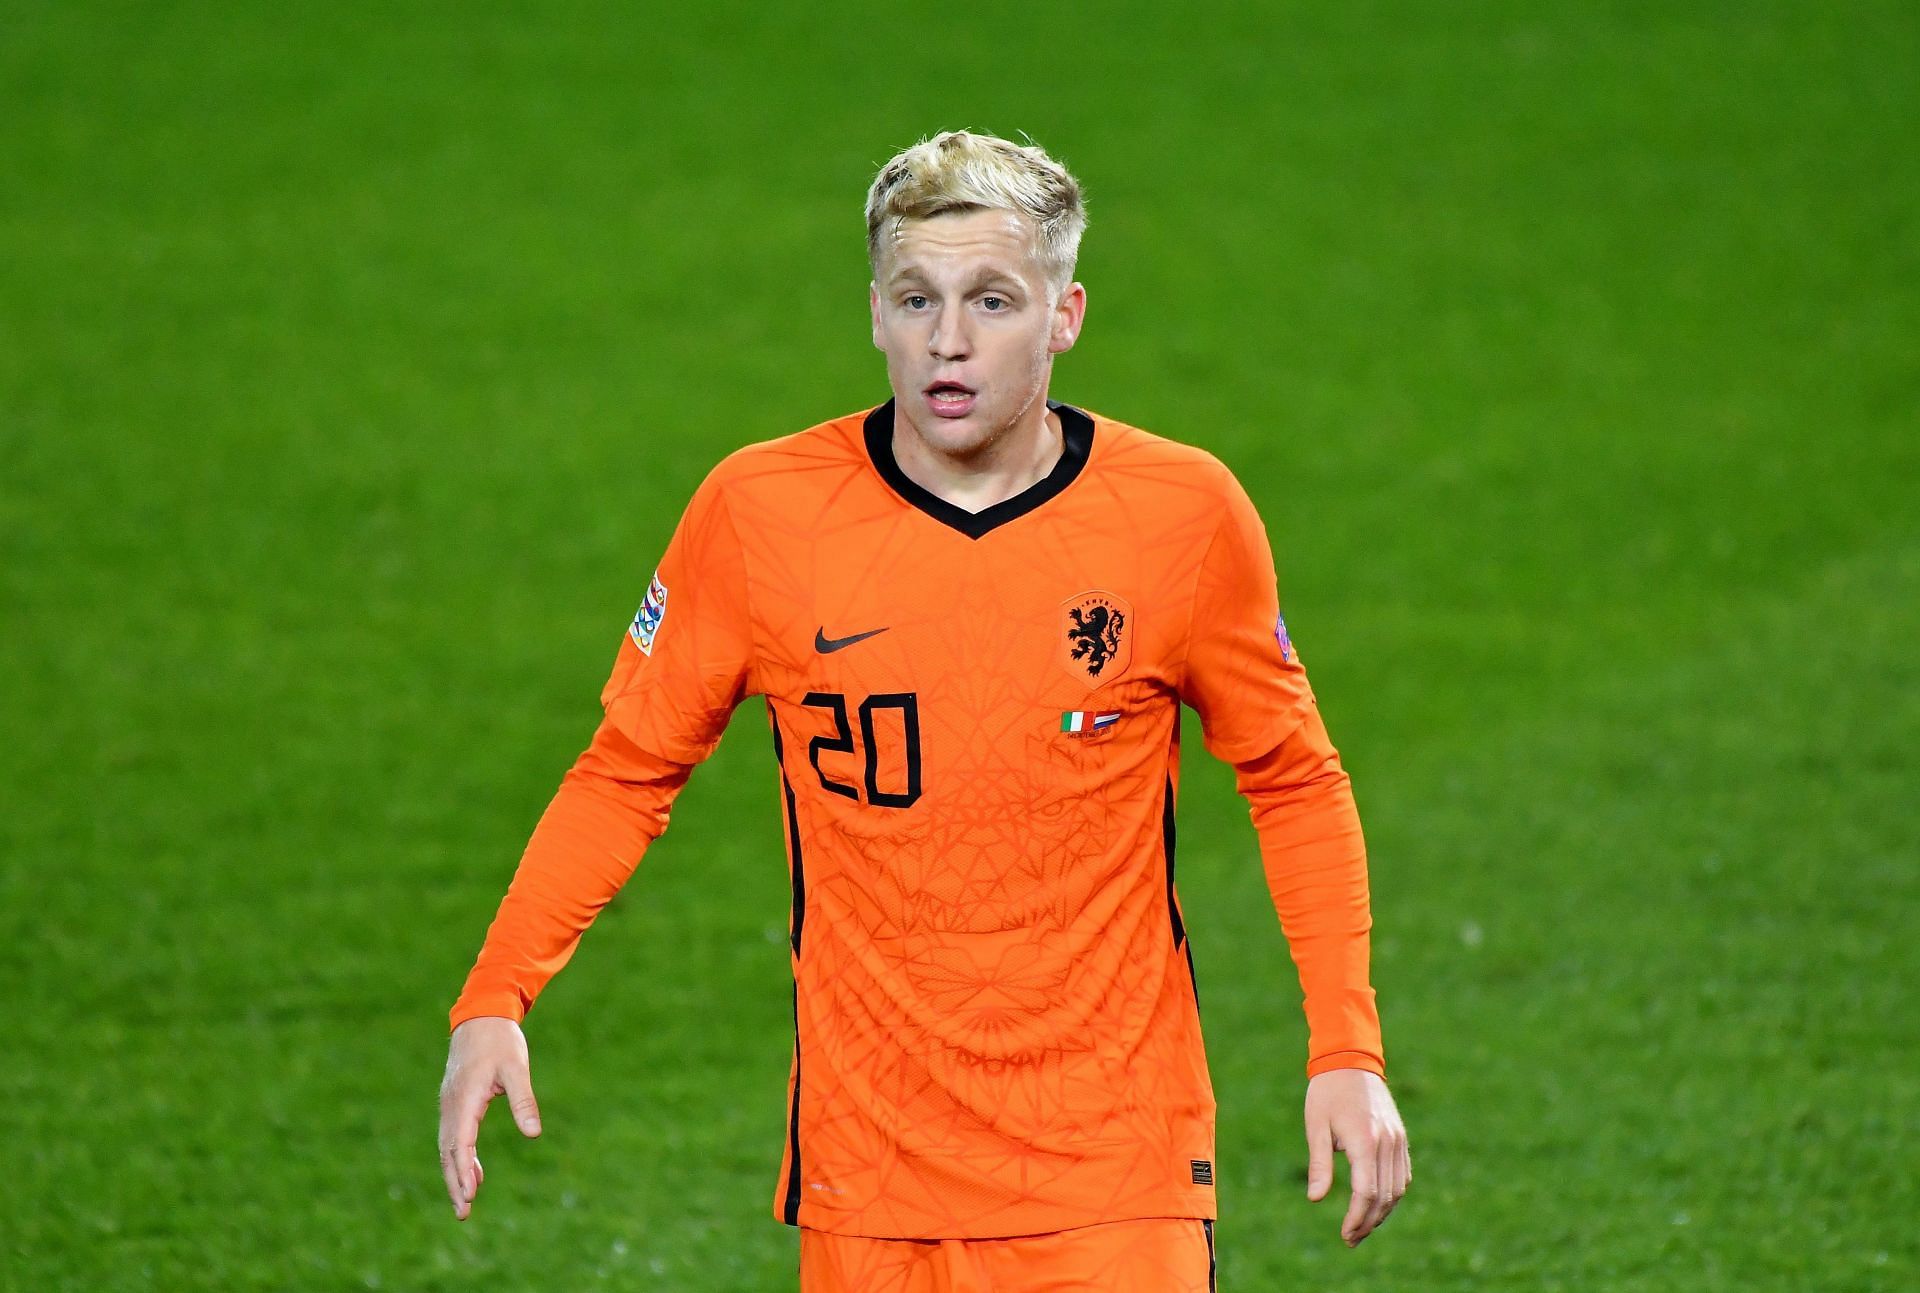 Donny van de Beek in action for the Netherlands during a UEFA Nations League game against Italy